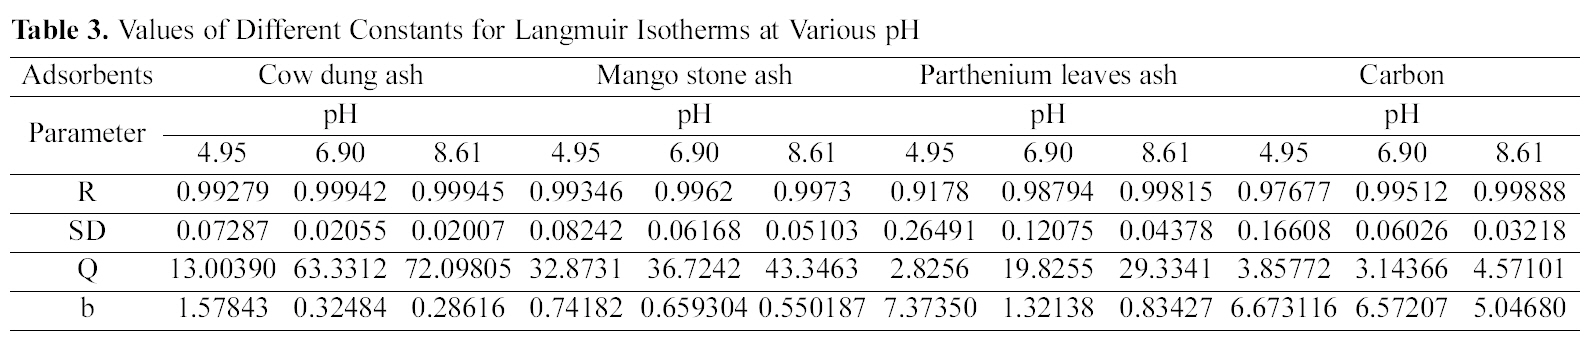 Values of Different Constants for Langmuir Isotherms at Various pH